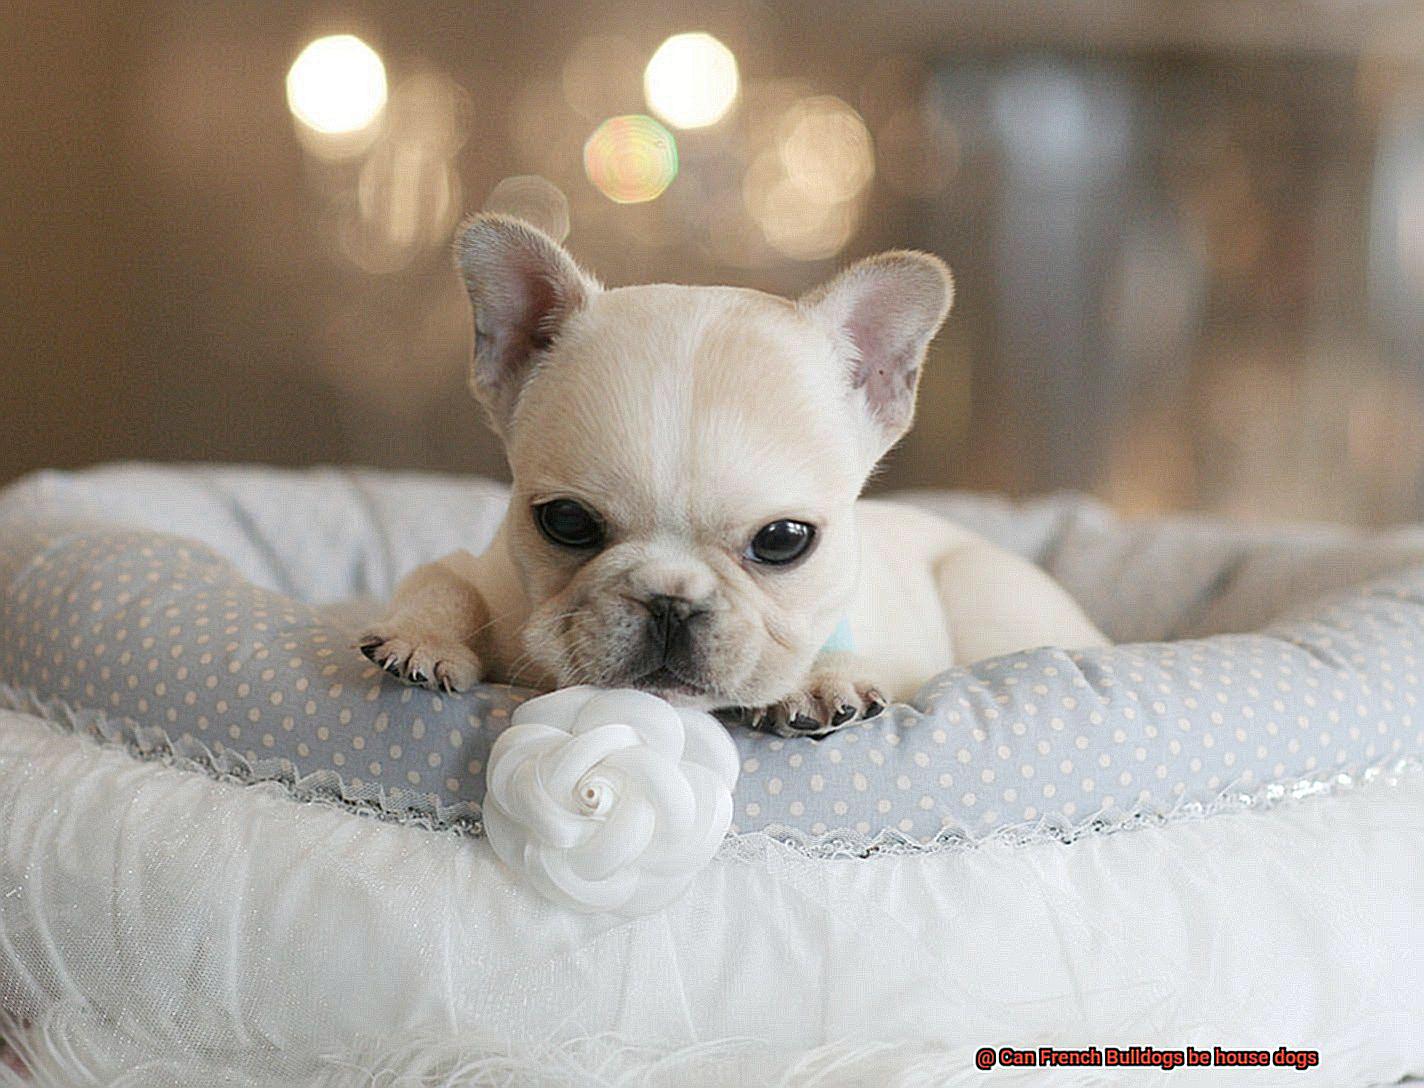 Can French Bulldogs be house dogs-10